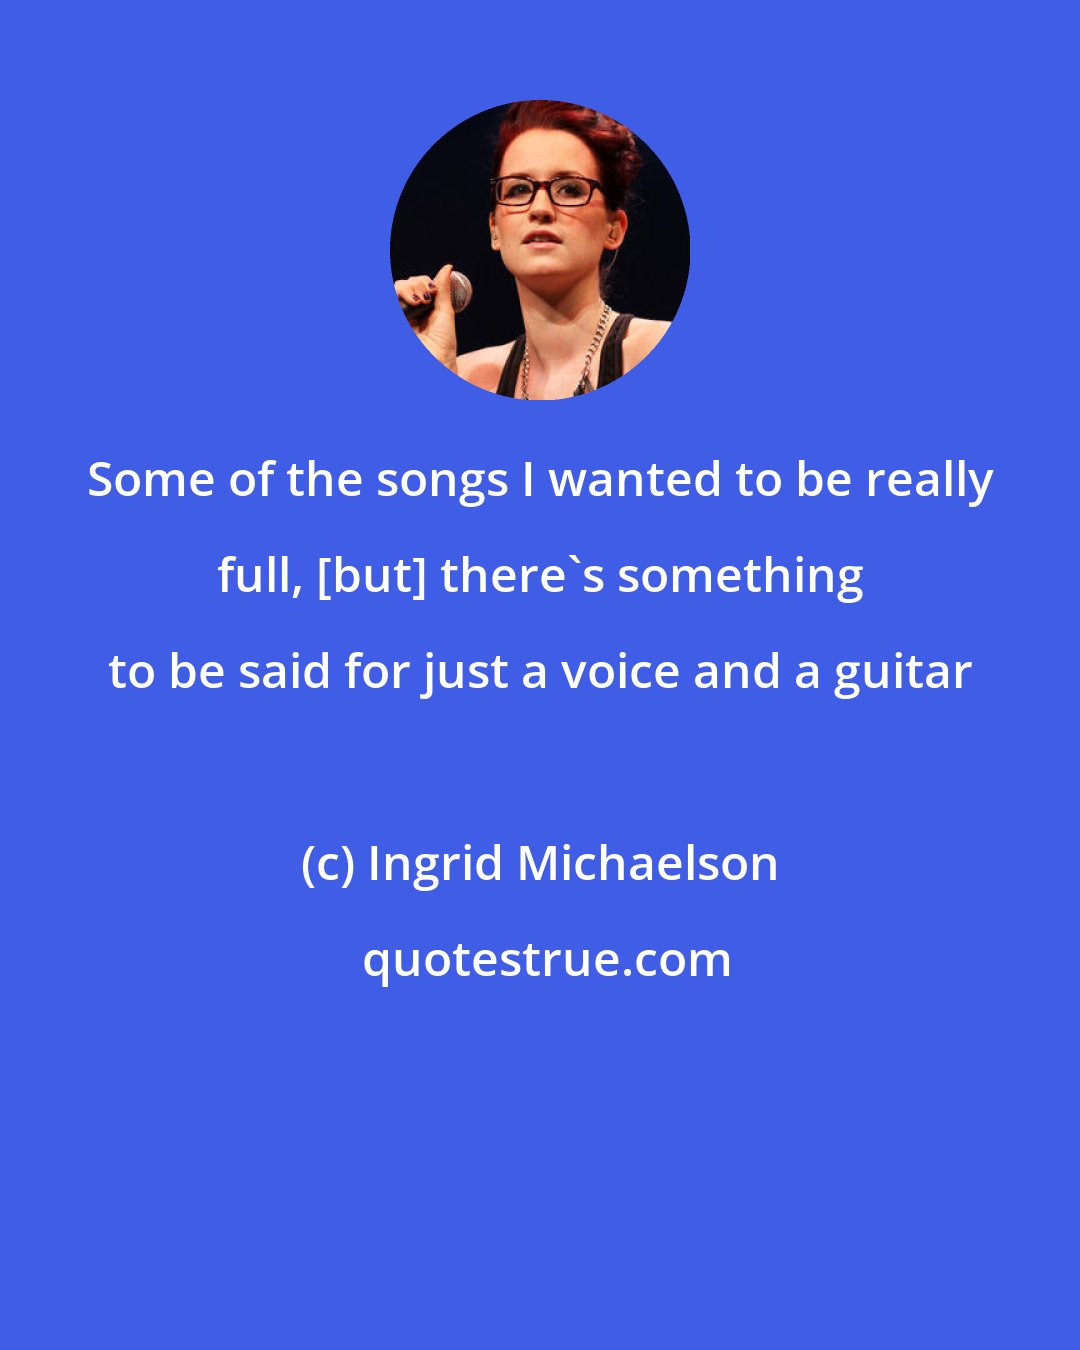 Ingrid Michaelson: Some of the songs I wanted to be really full, [but] there's something to be said for just a voice and a guitar